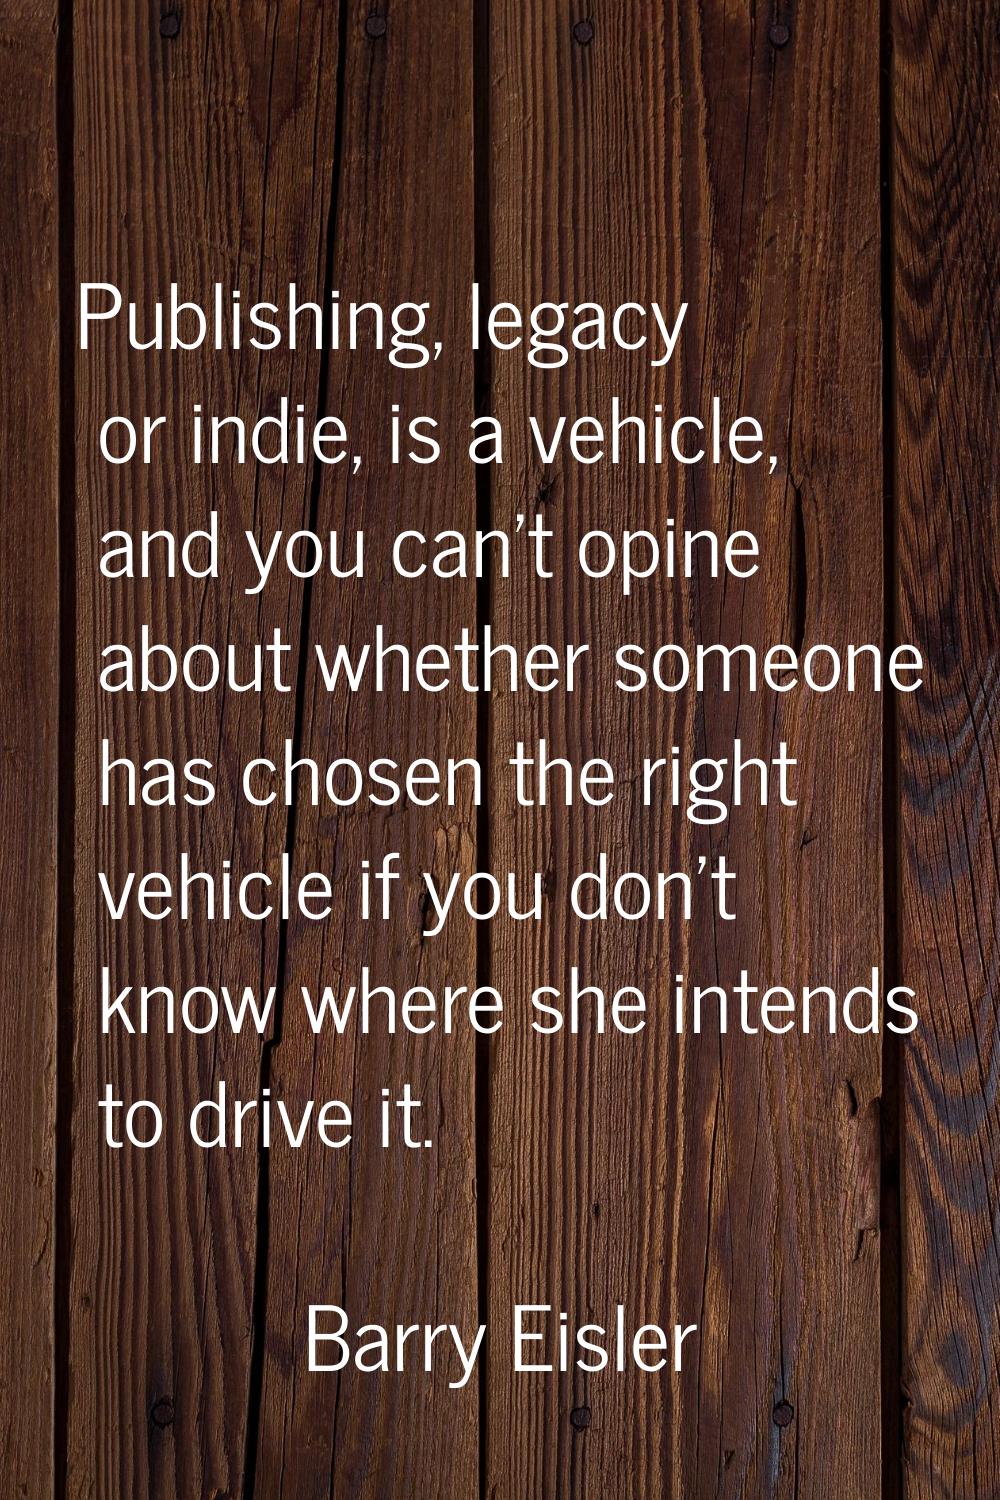 Publishing, legacy or indie, is a vehicle, and you can't opine about whether someone has chosen the